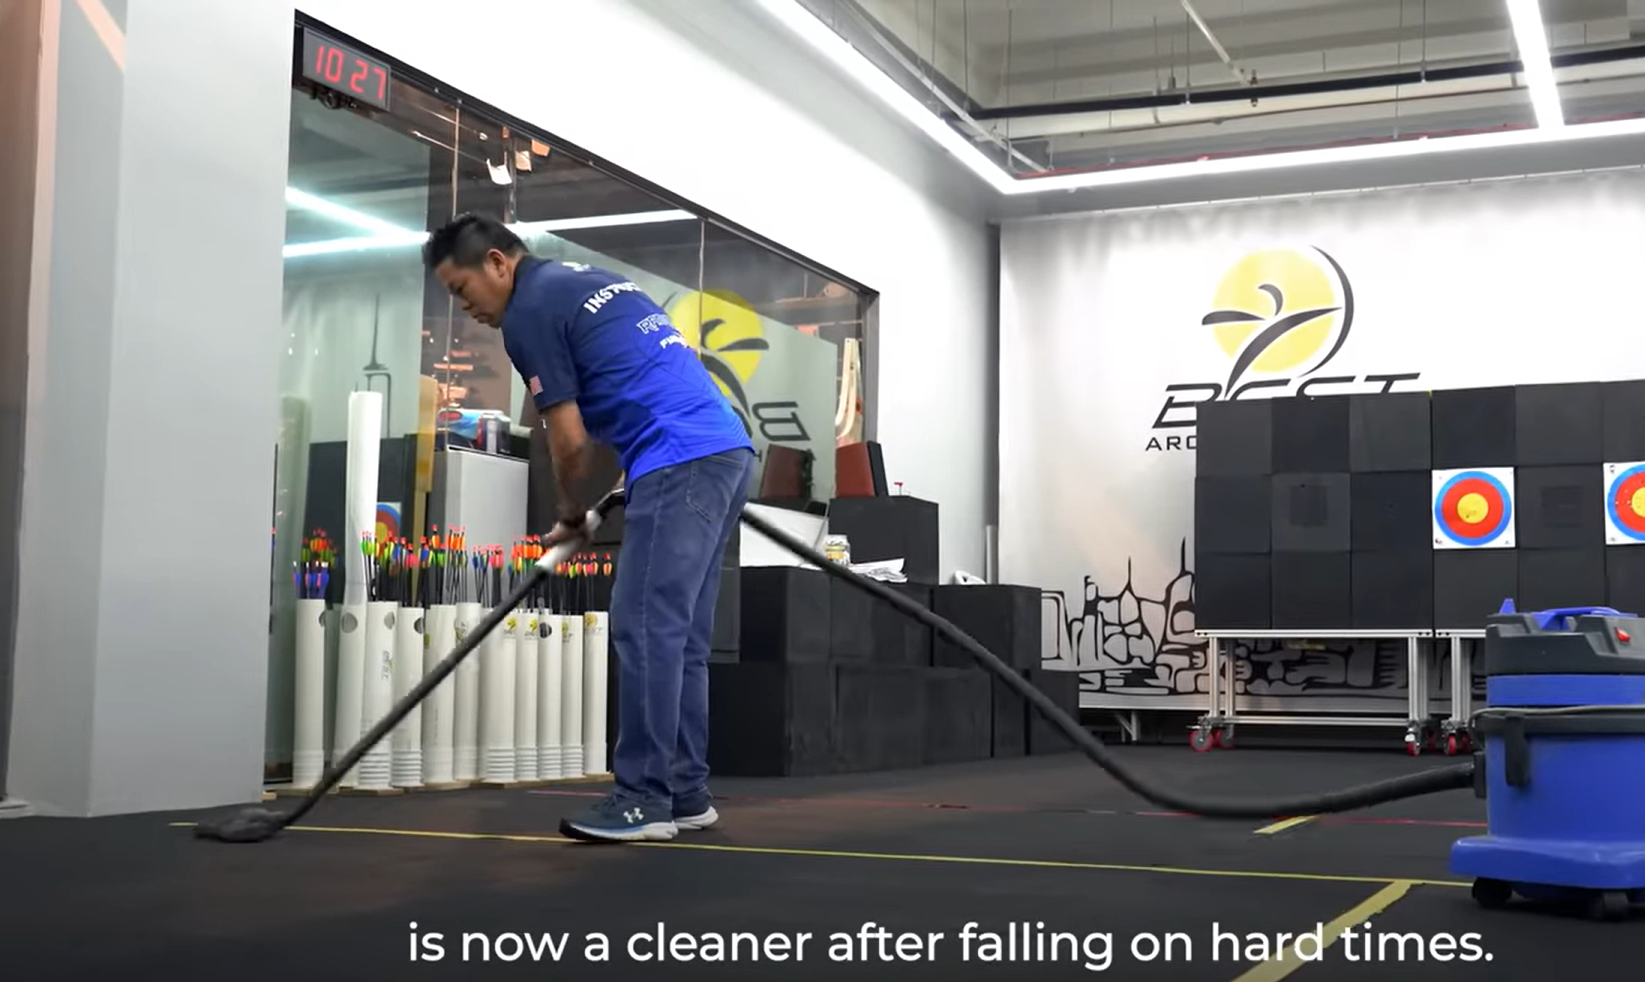 Former m'sian squash champion now works as cleaner at kl archery centre